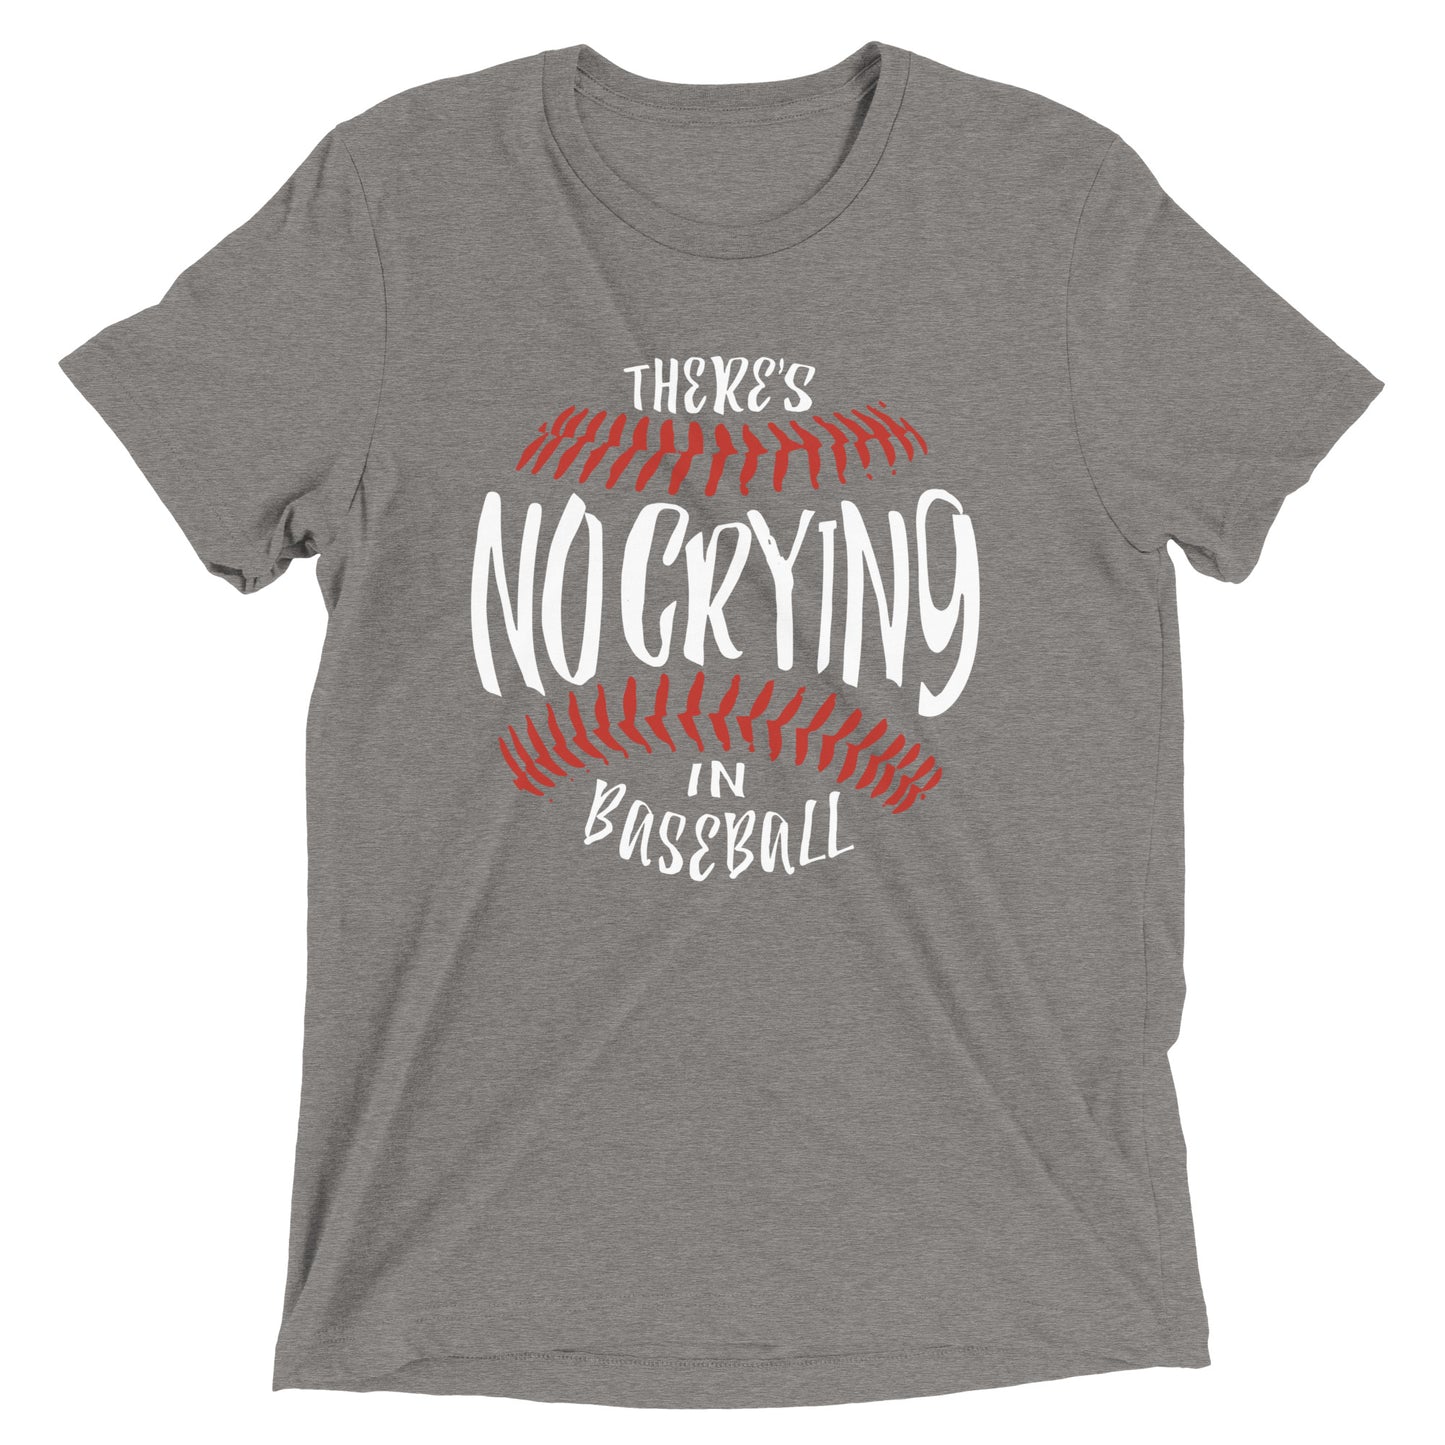 There's No Crying In Baseball Men's Tri-Blend Tee